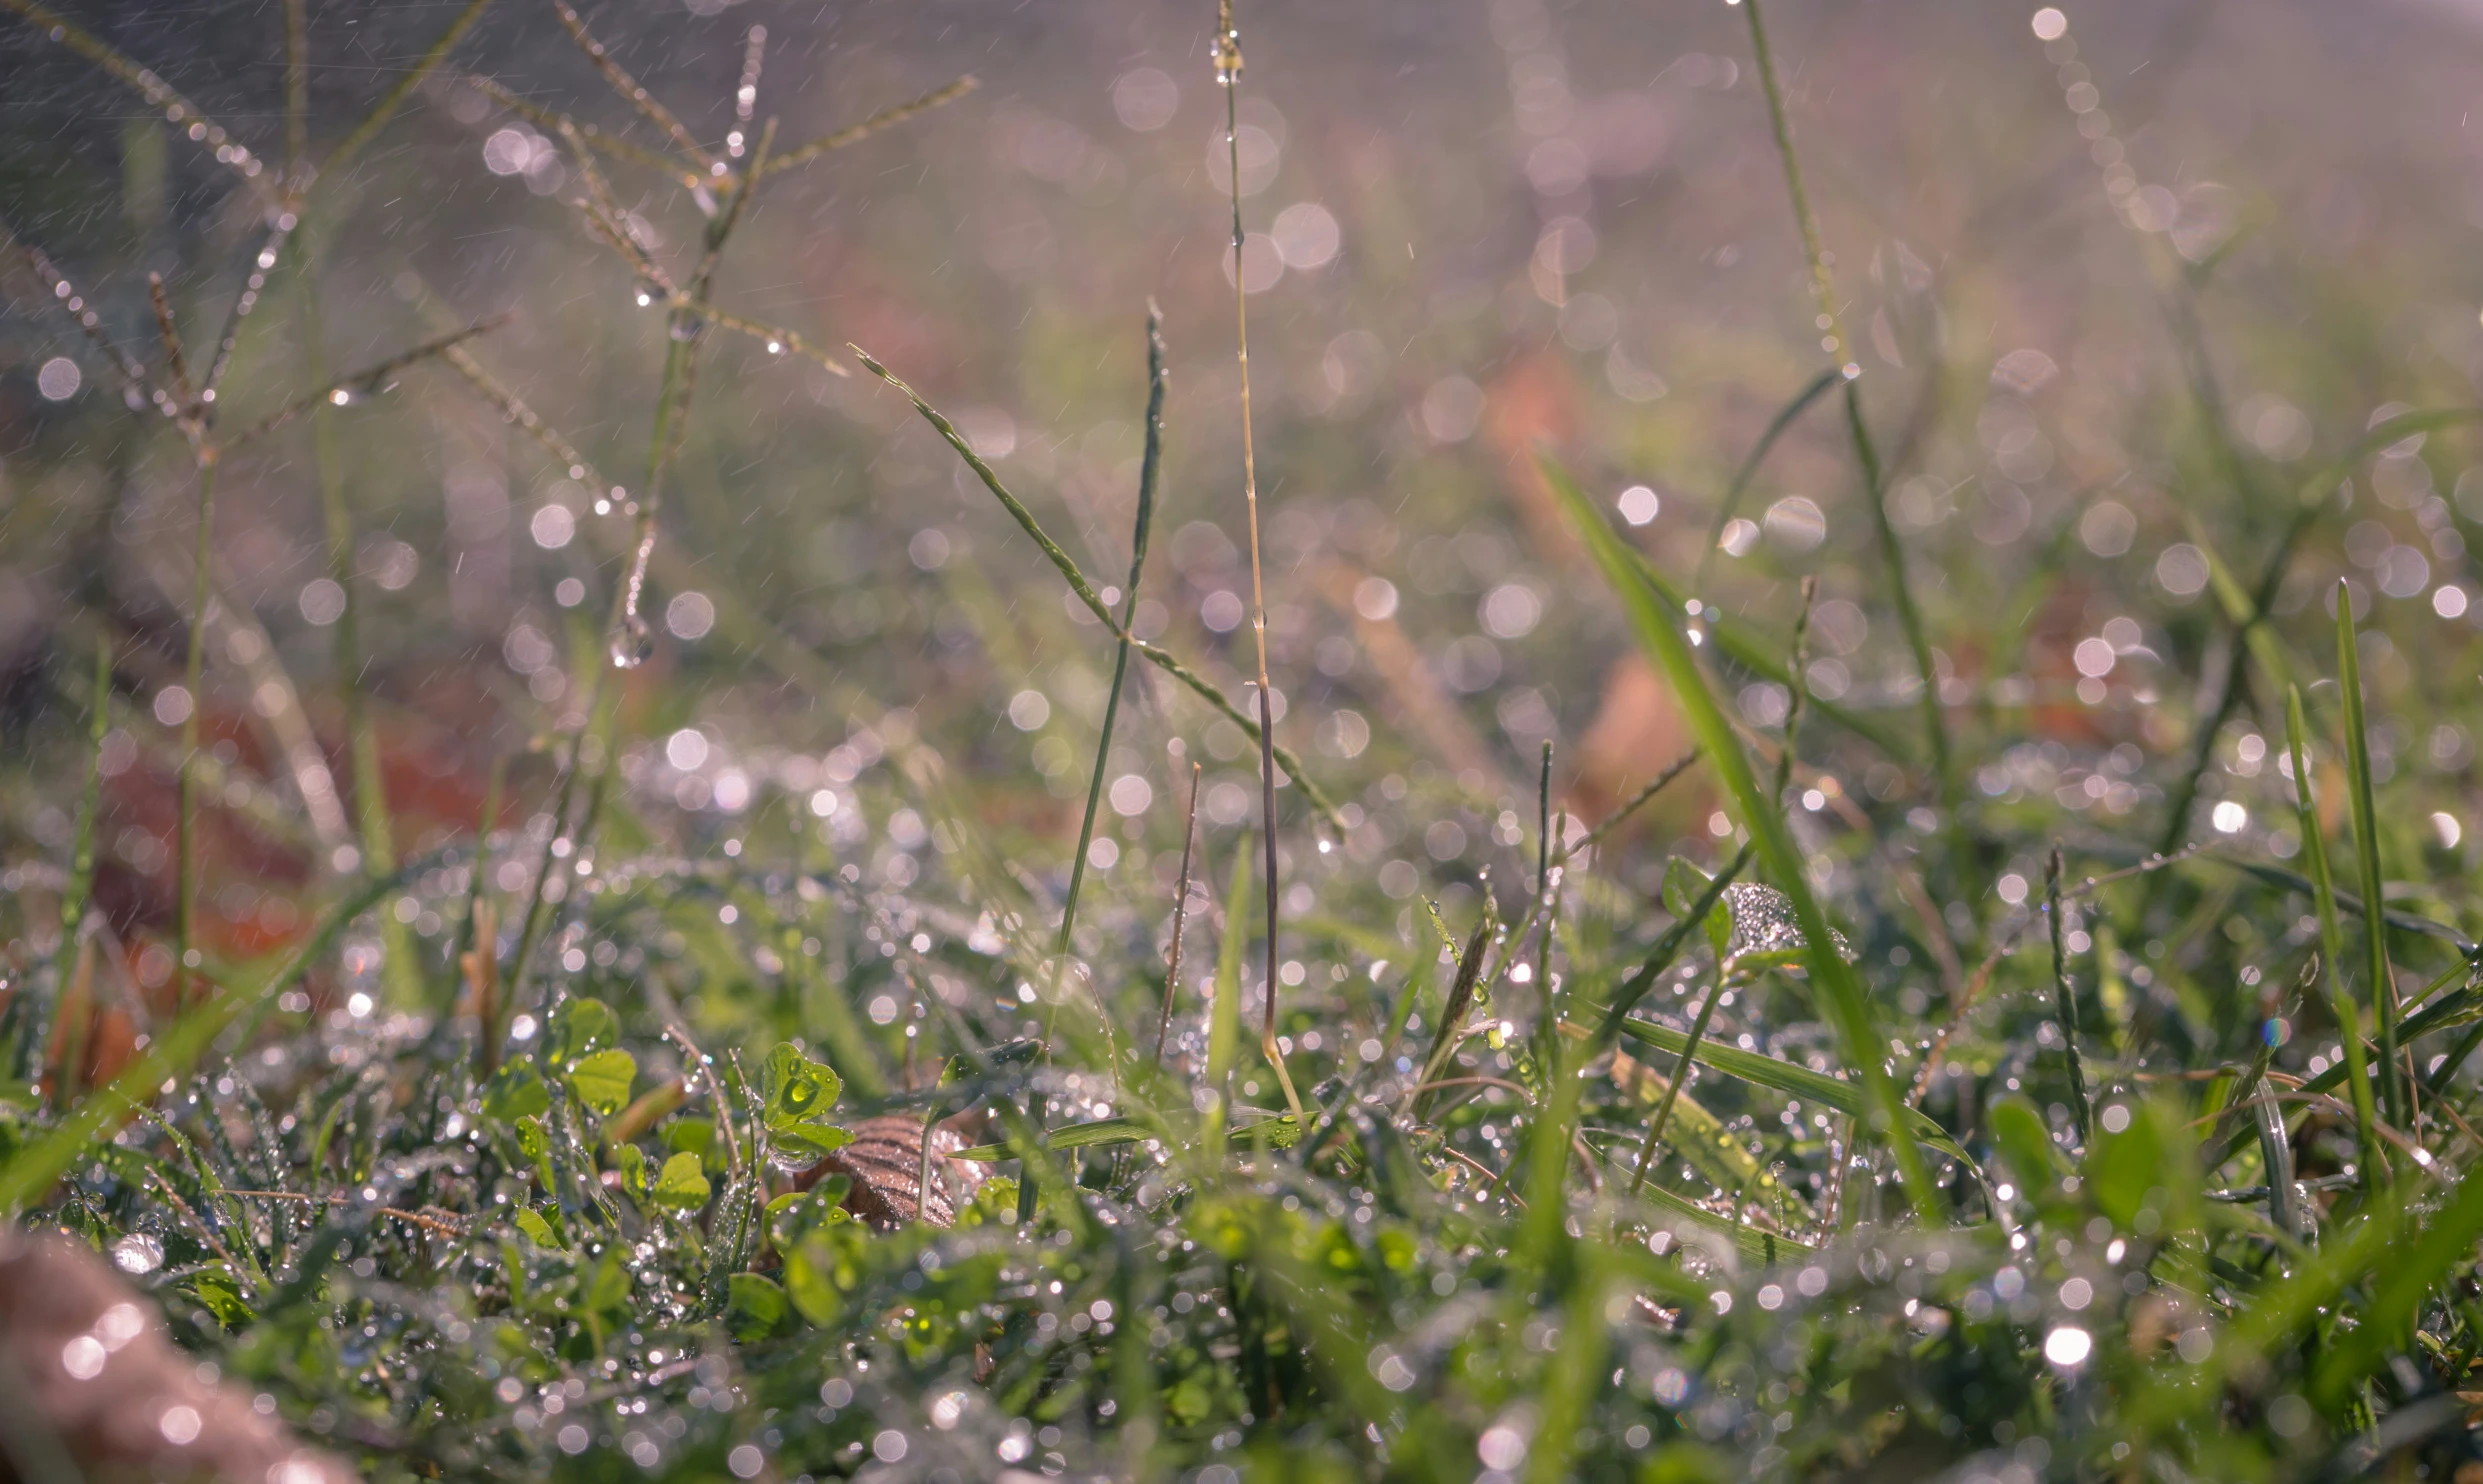 water droplets on the grass on a sunny day